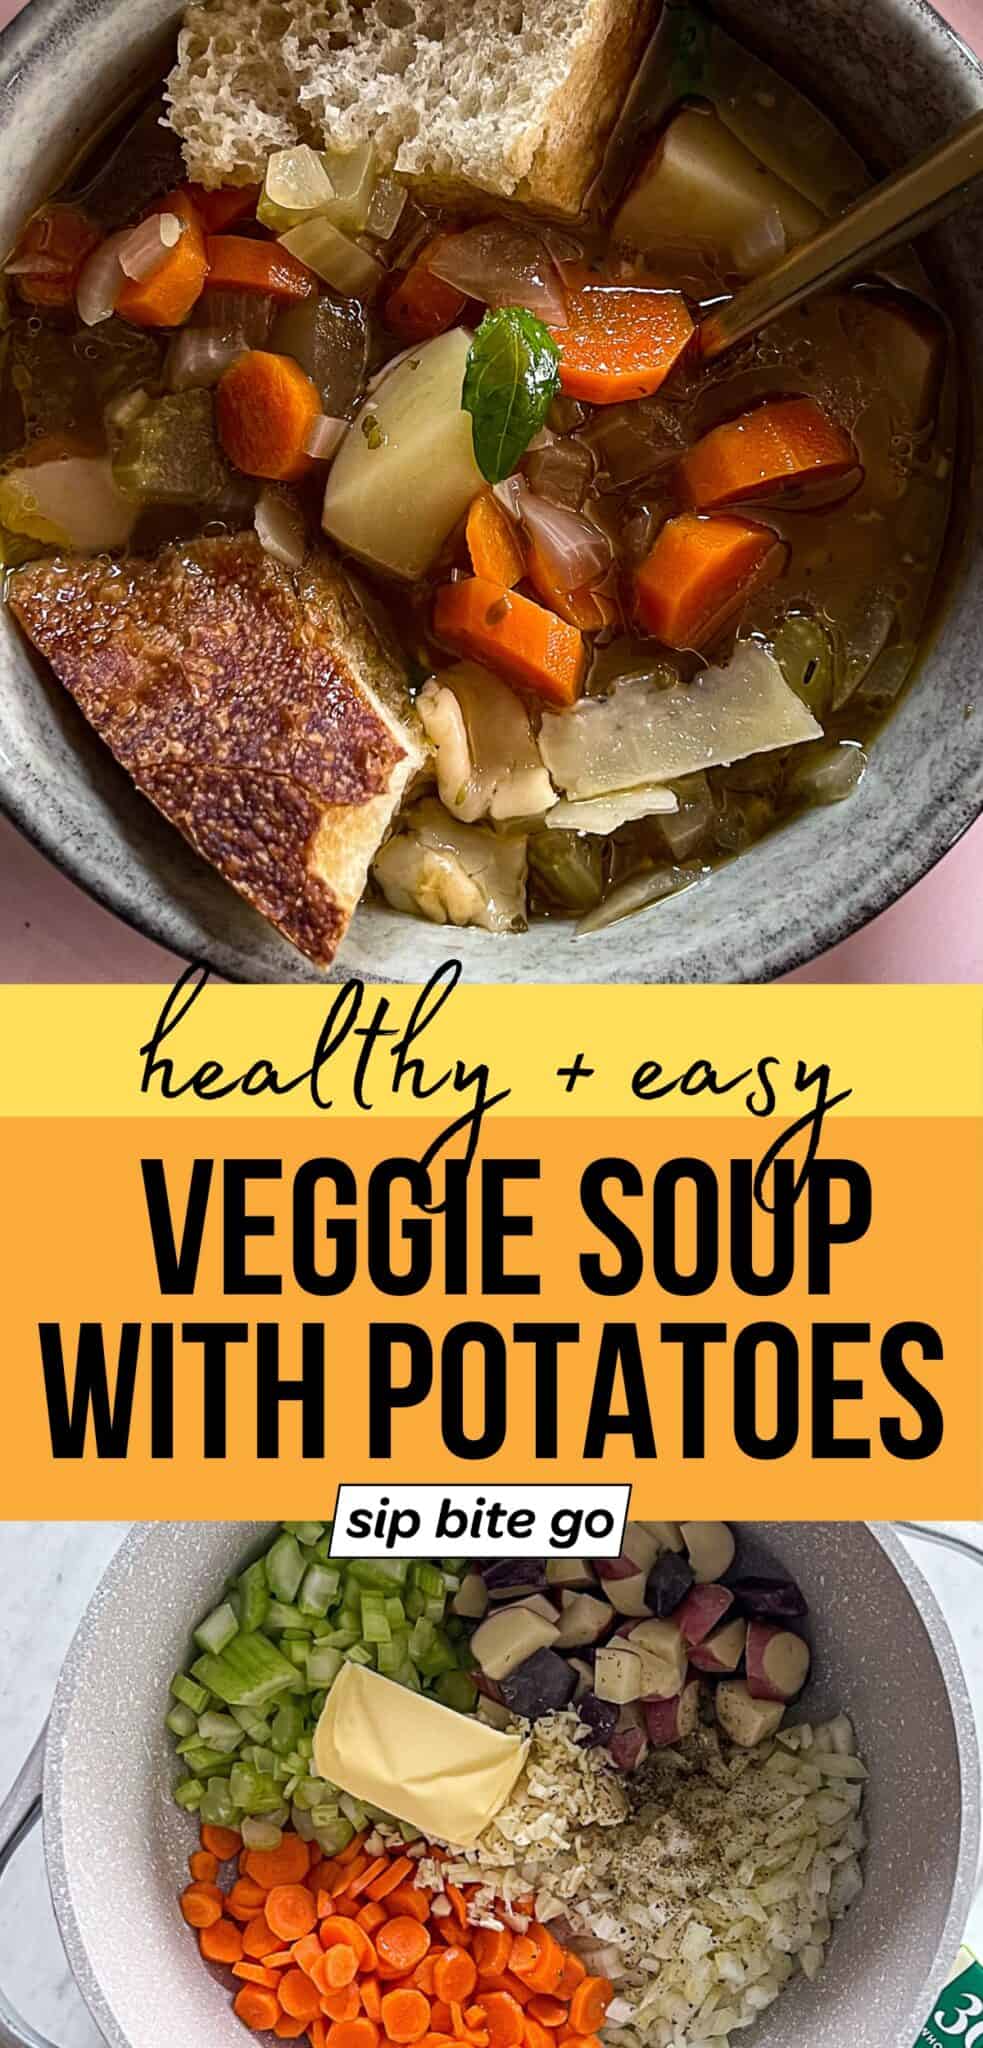 Healthy Vegetable Soup With Potatoes - Sip Bite Go